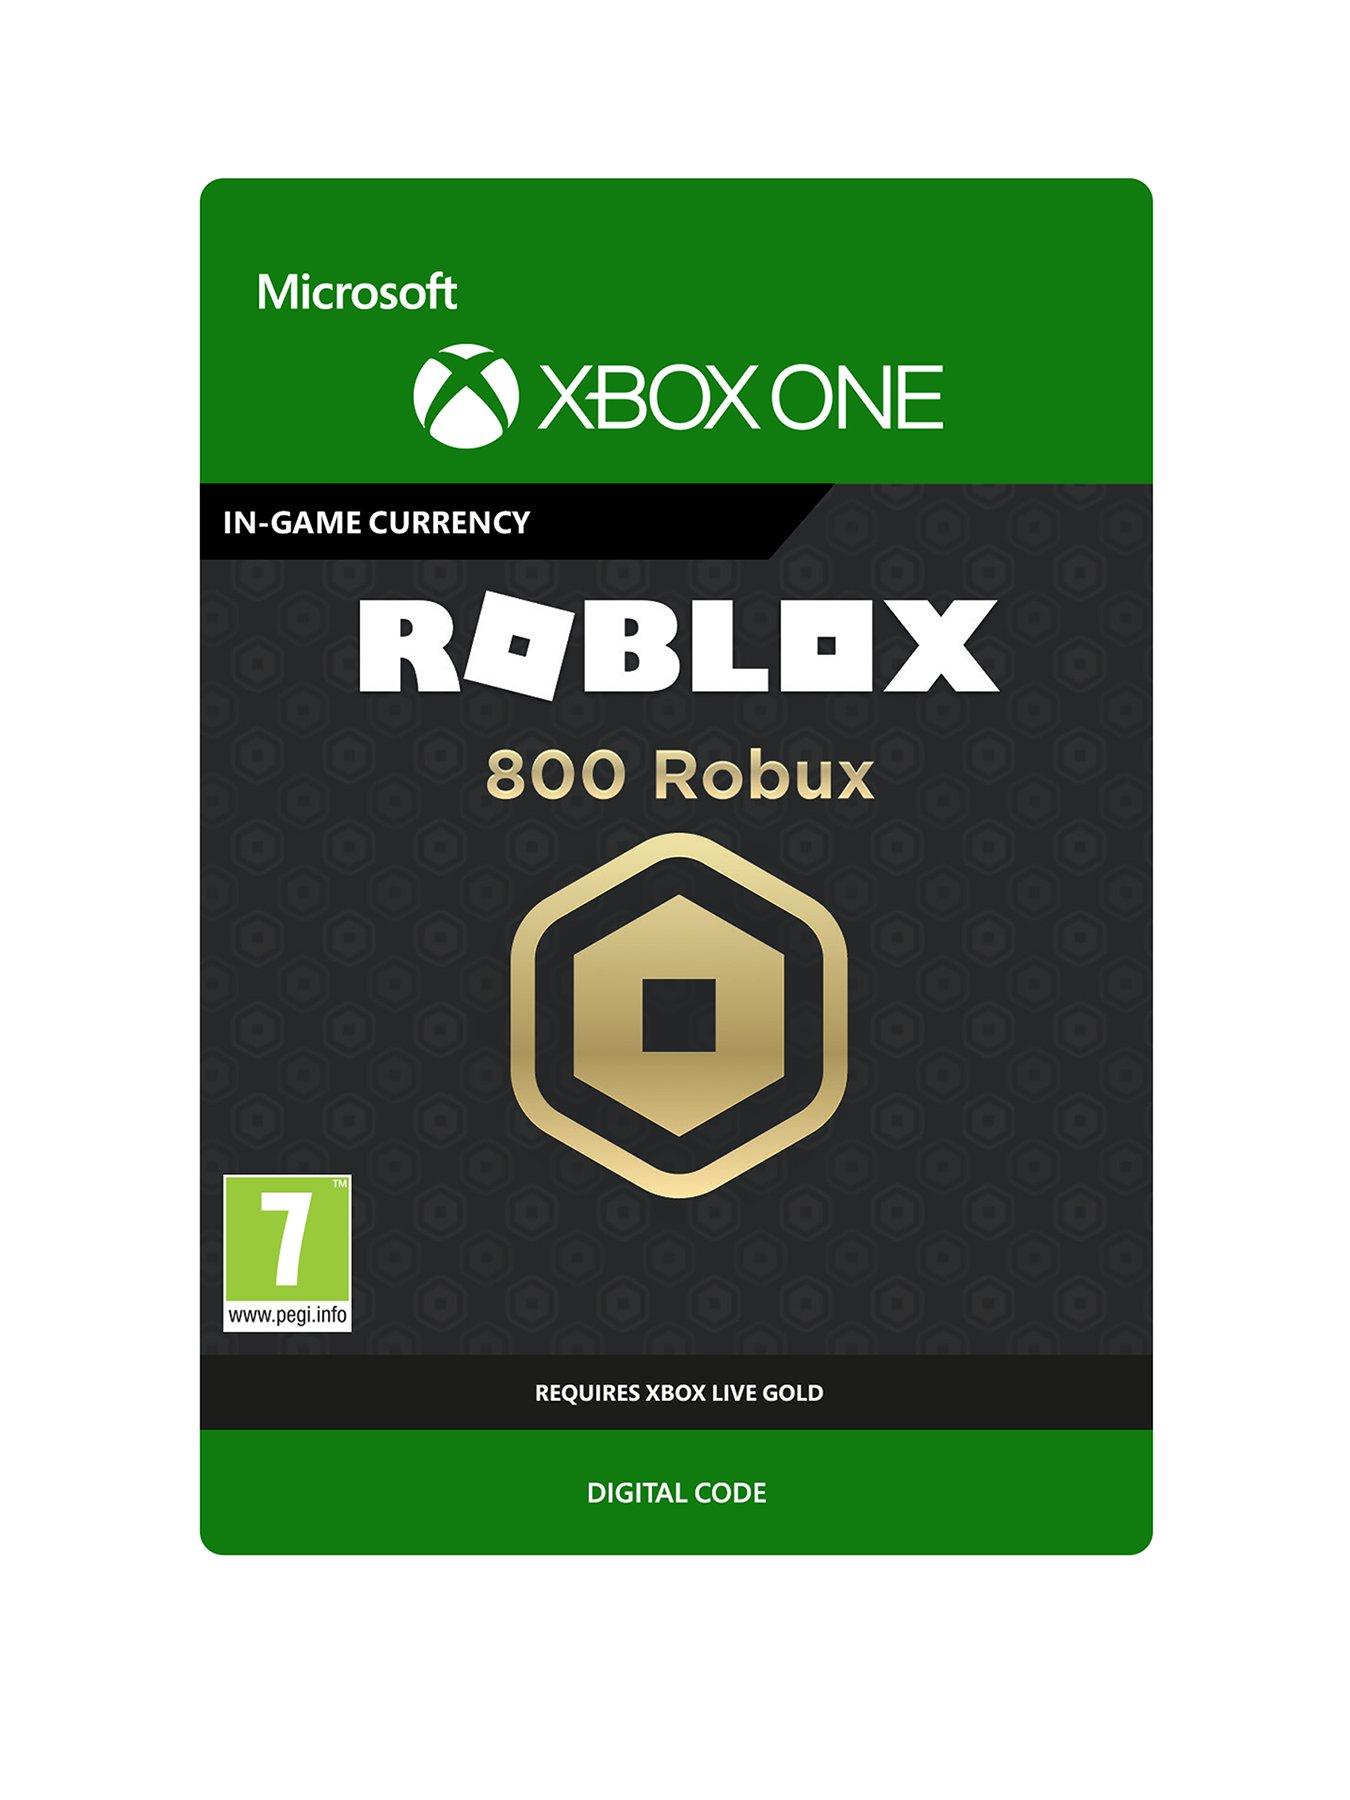 Digital Games Latest Digital Download Games Very Co Uk - how to get 5 trillion robux free robux limited edition